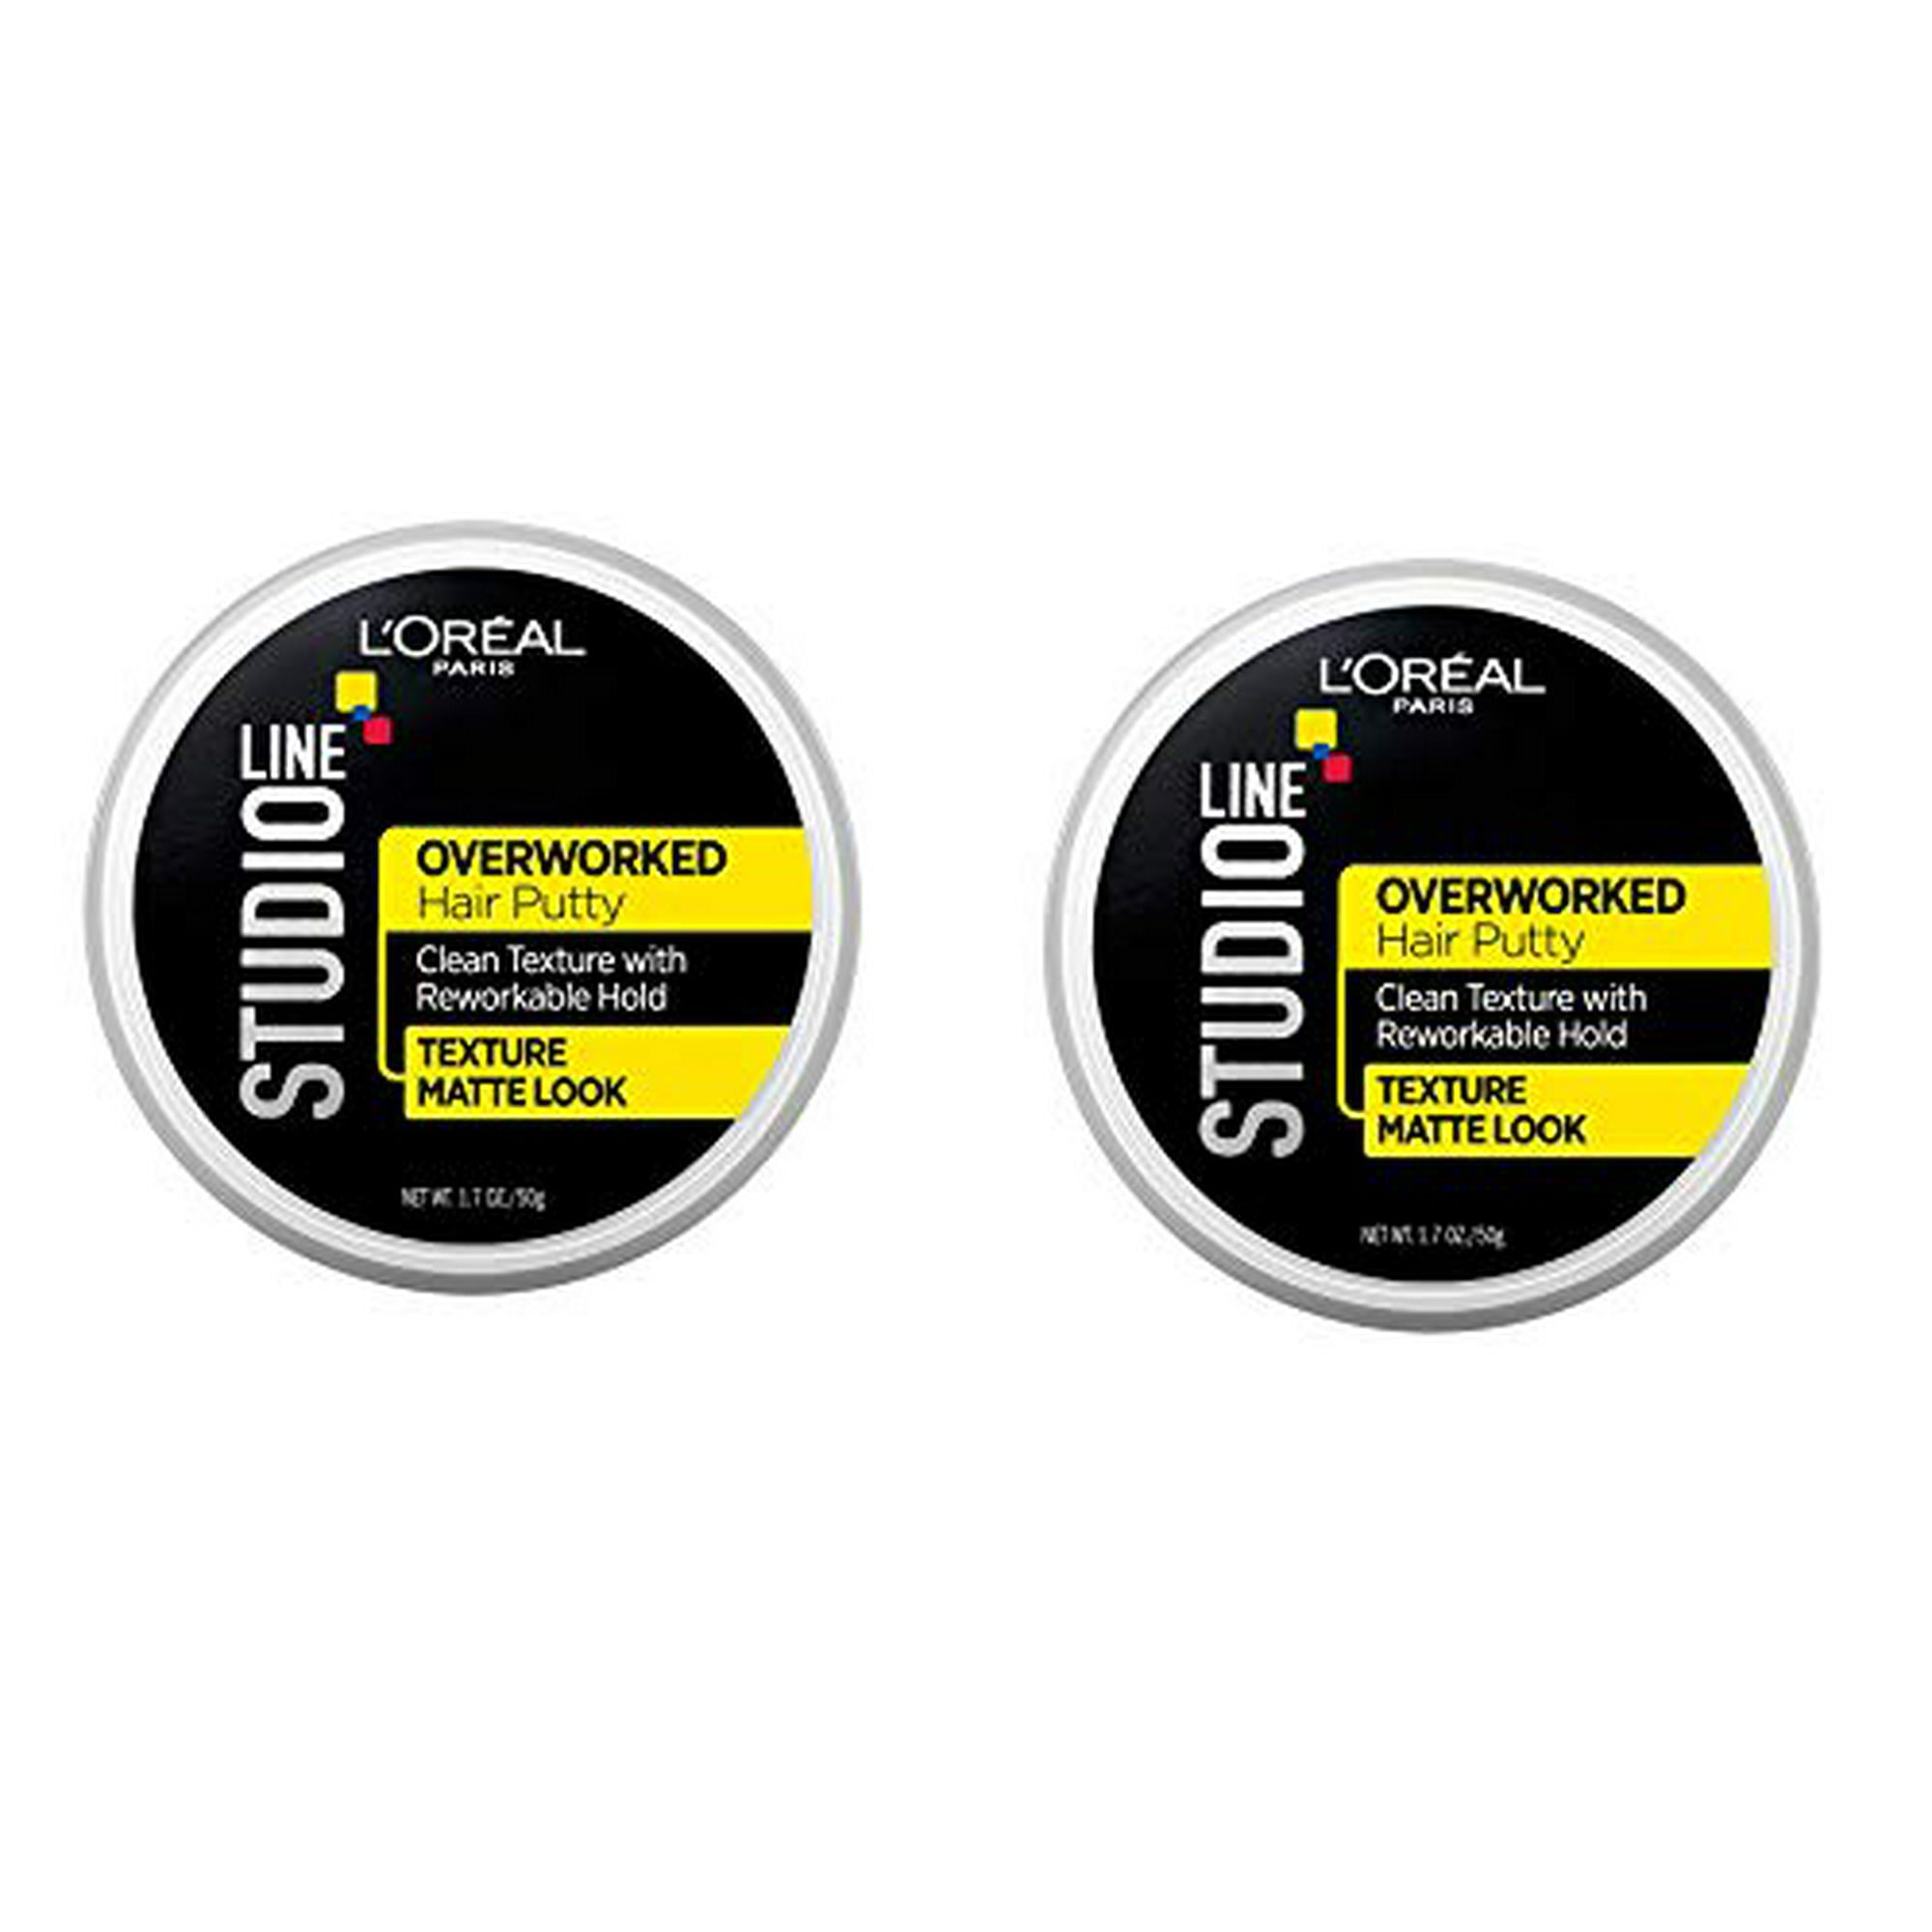 Loreal Paris Studio Line Texture And Control Overworked Hair Putty Styling  Paste,  Oz (2 Pack) | Walmart Canada